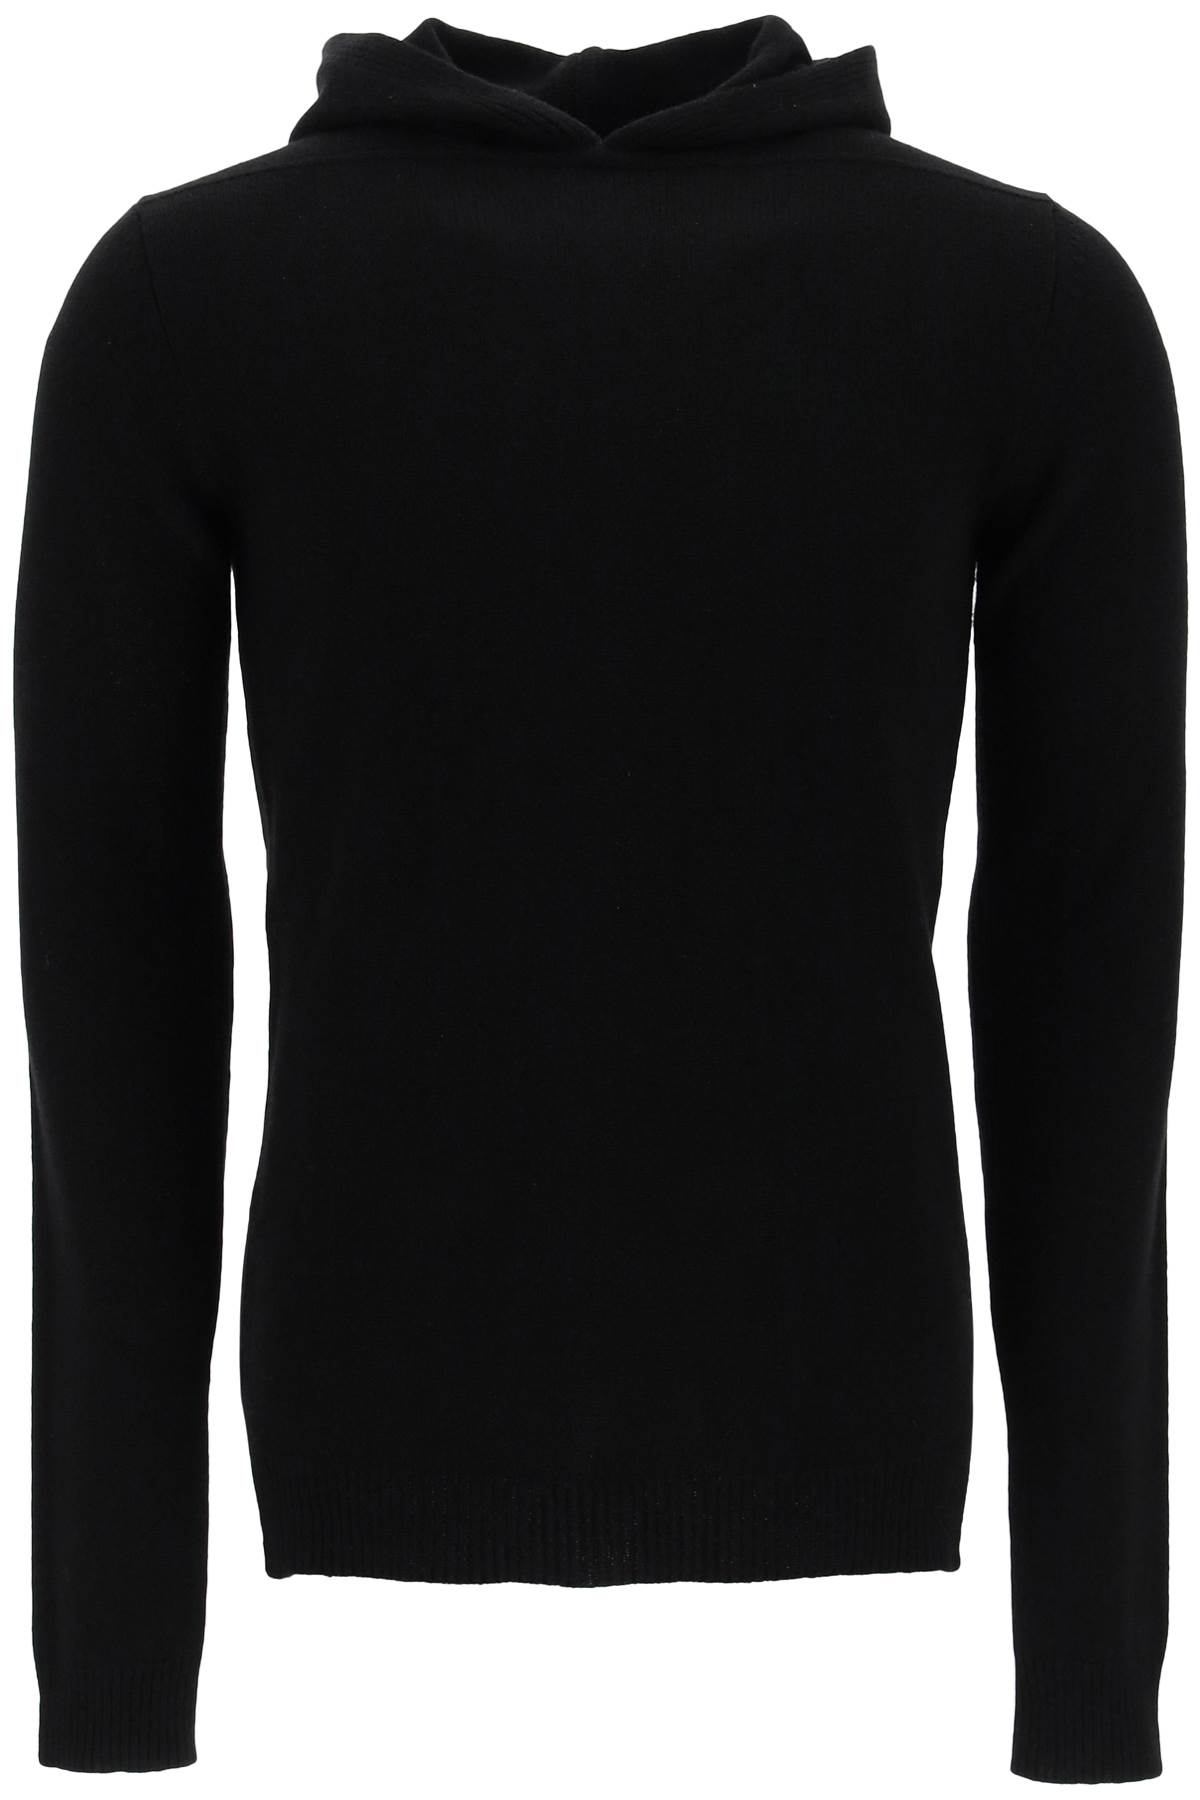 Rick Owens Cashmere Hooded Sweater